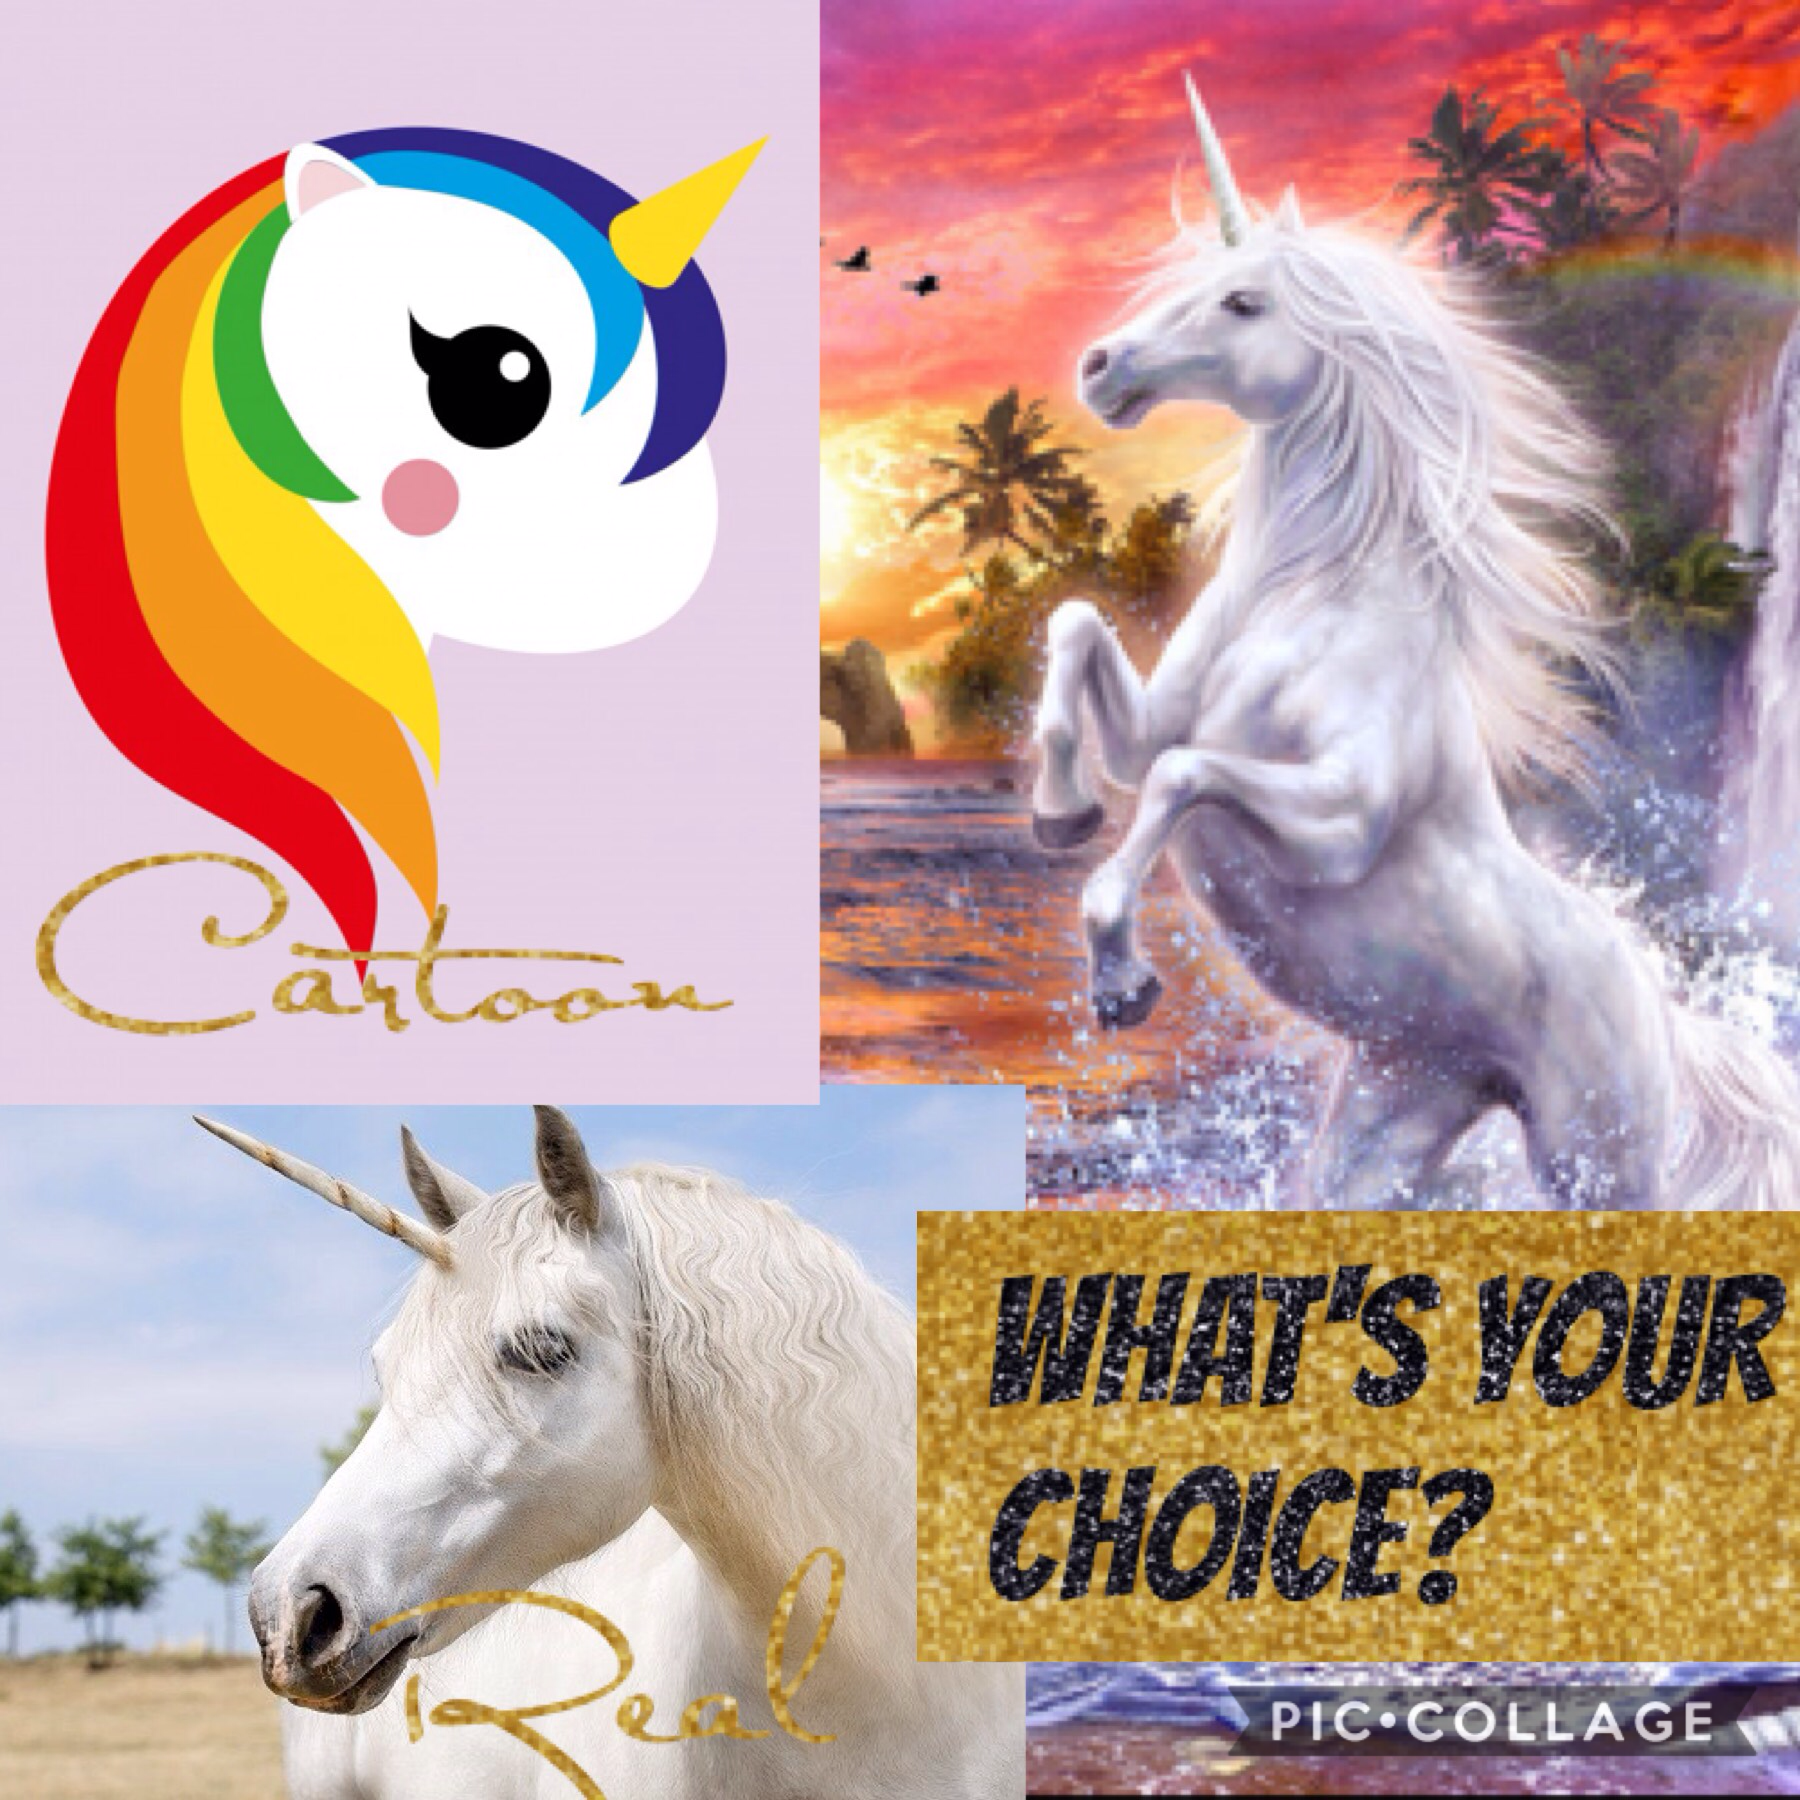 🦄tap🦄
What's your choice?
Cartoon 🦄 or a real 🦄🤗
My choice is a real unicorn. Let iT now in THE reactions.
